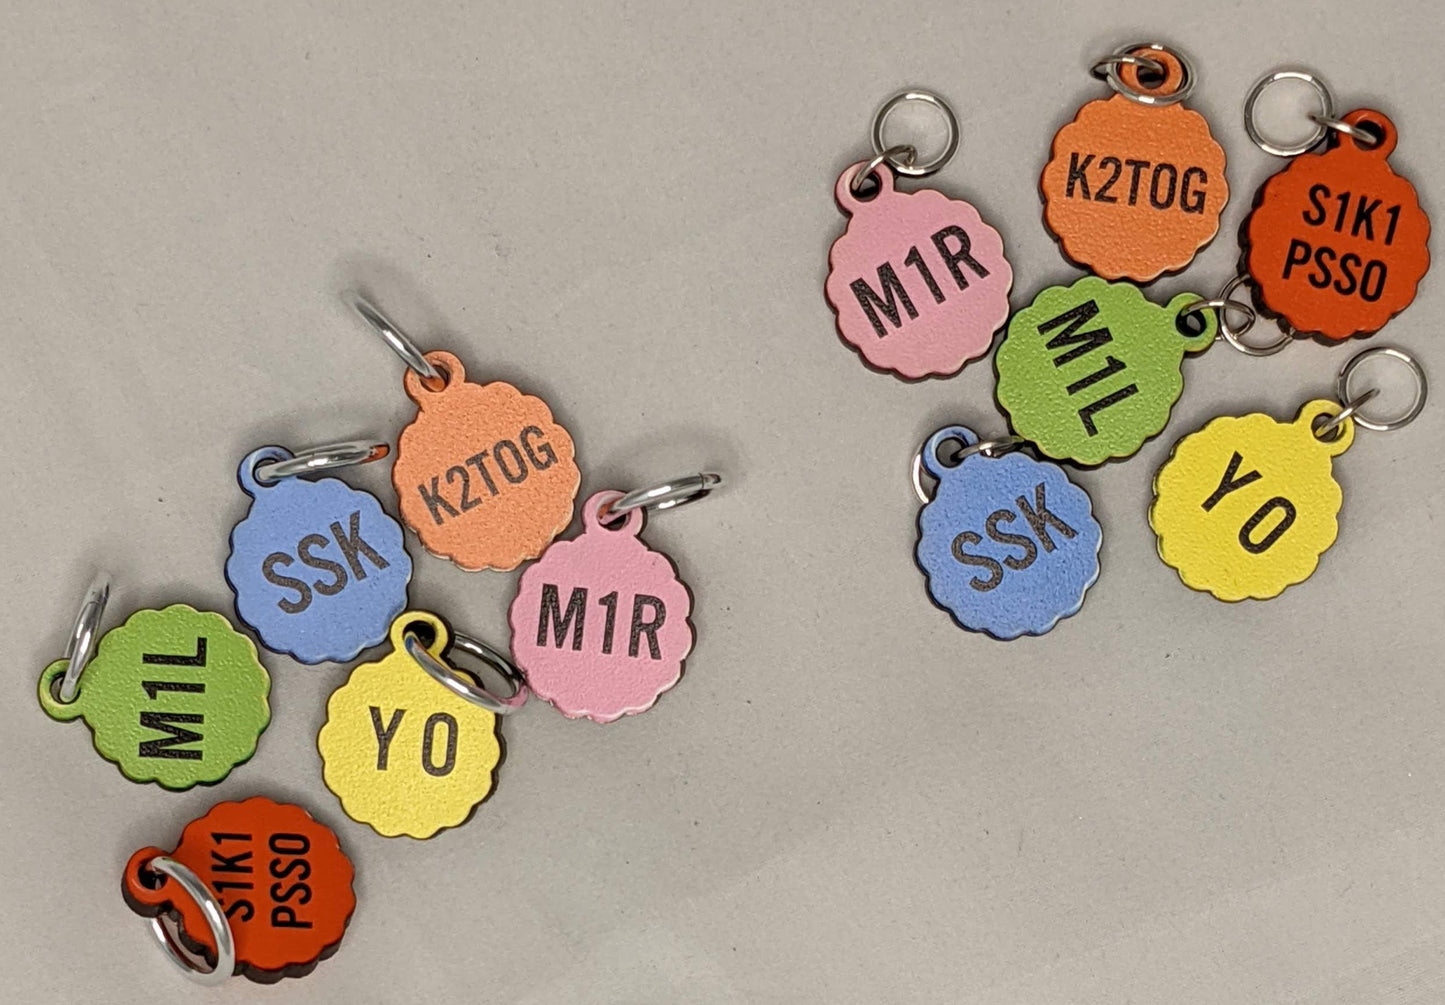 7th Floor Stitch Markers